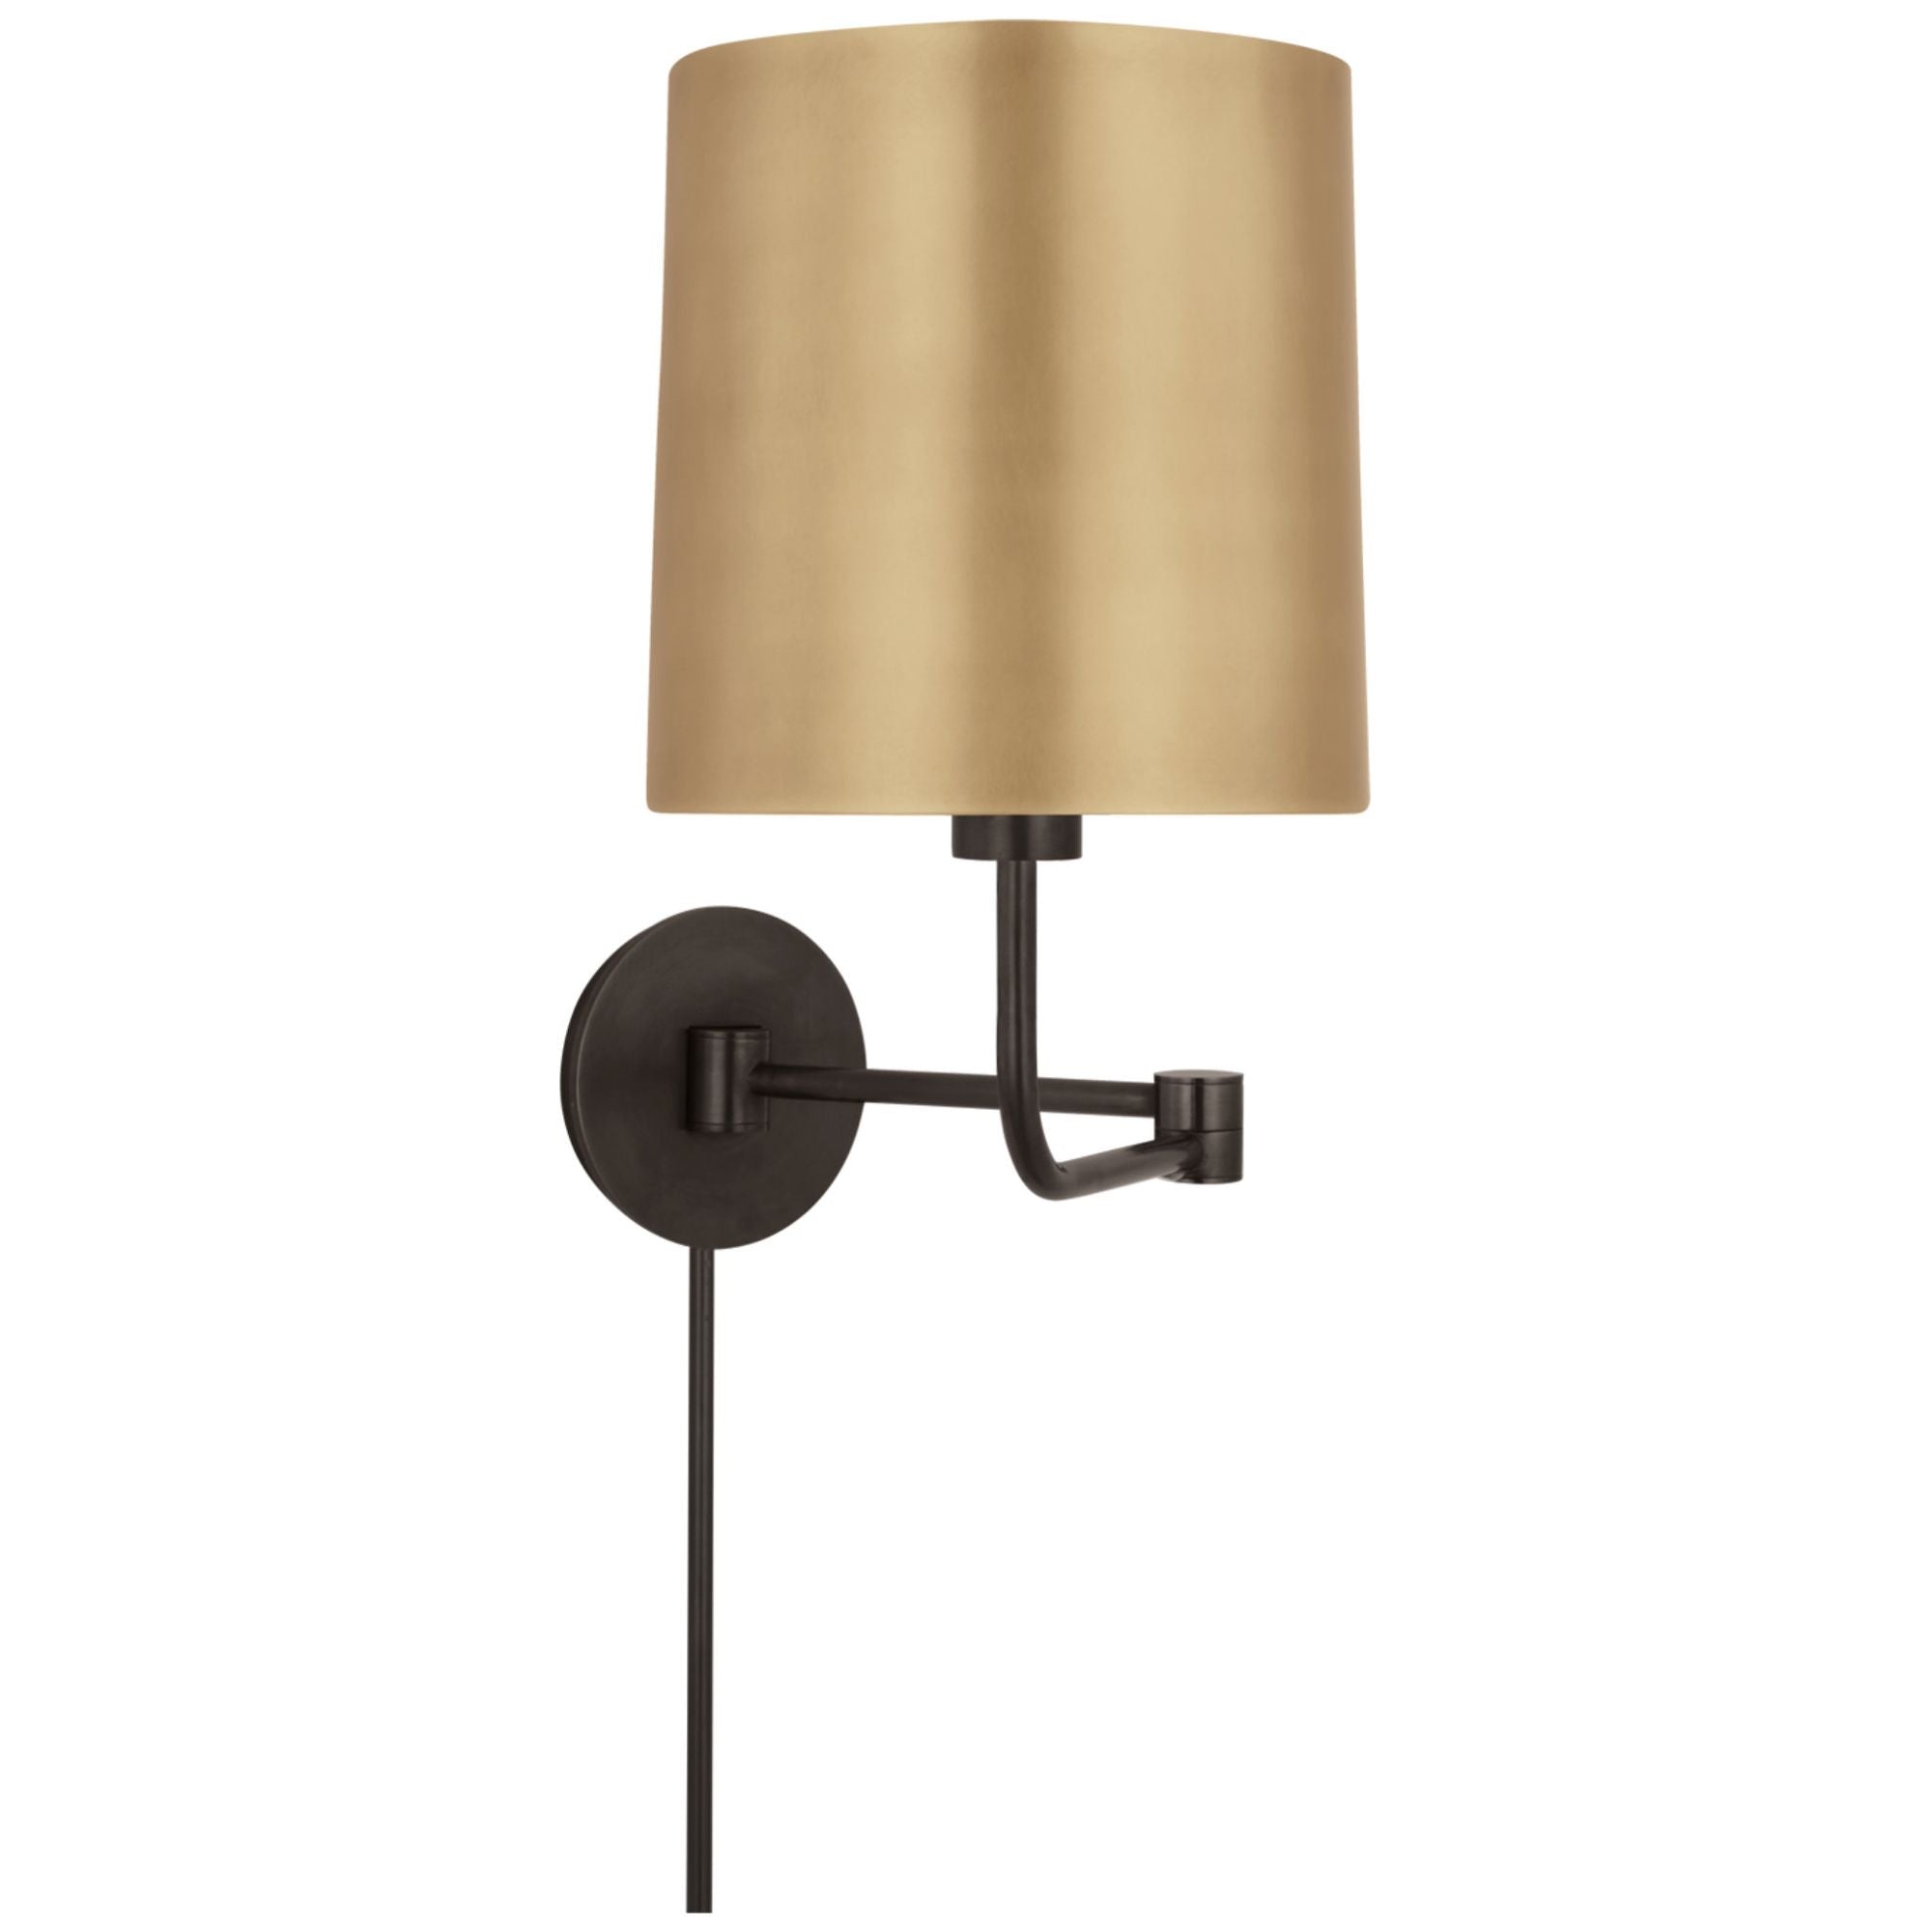 Barbara Barry Go Lightly Swing Arm Wall Light in Bronze with Soft Brass Shade